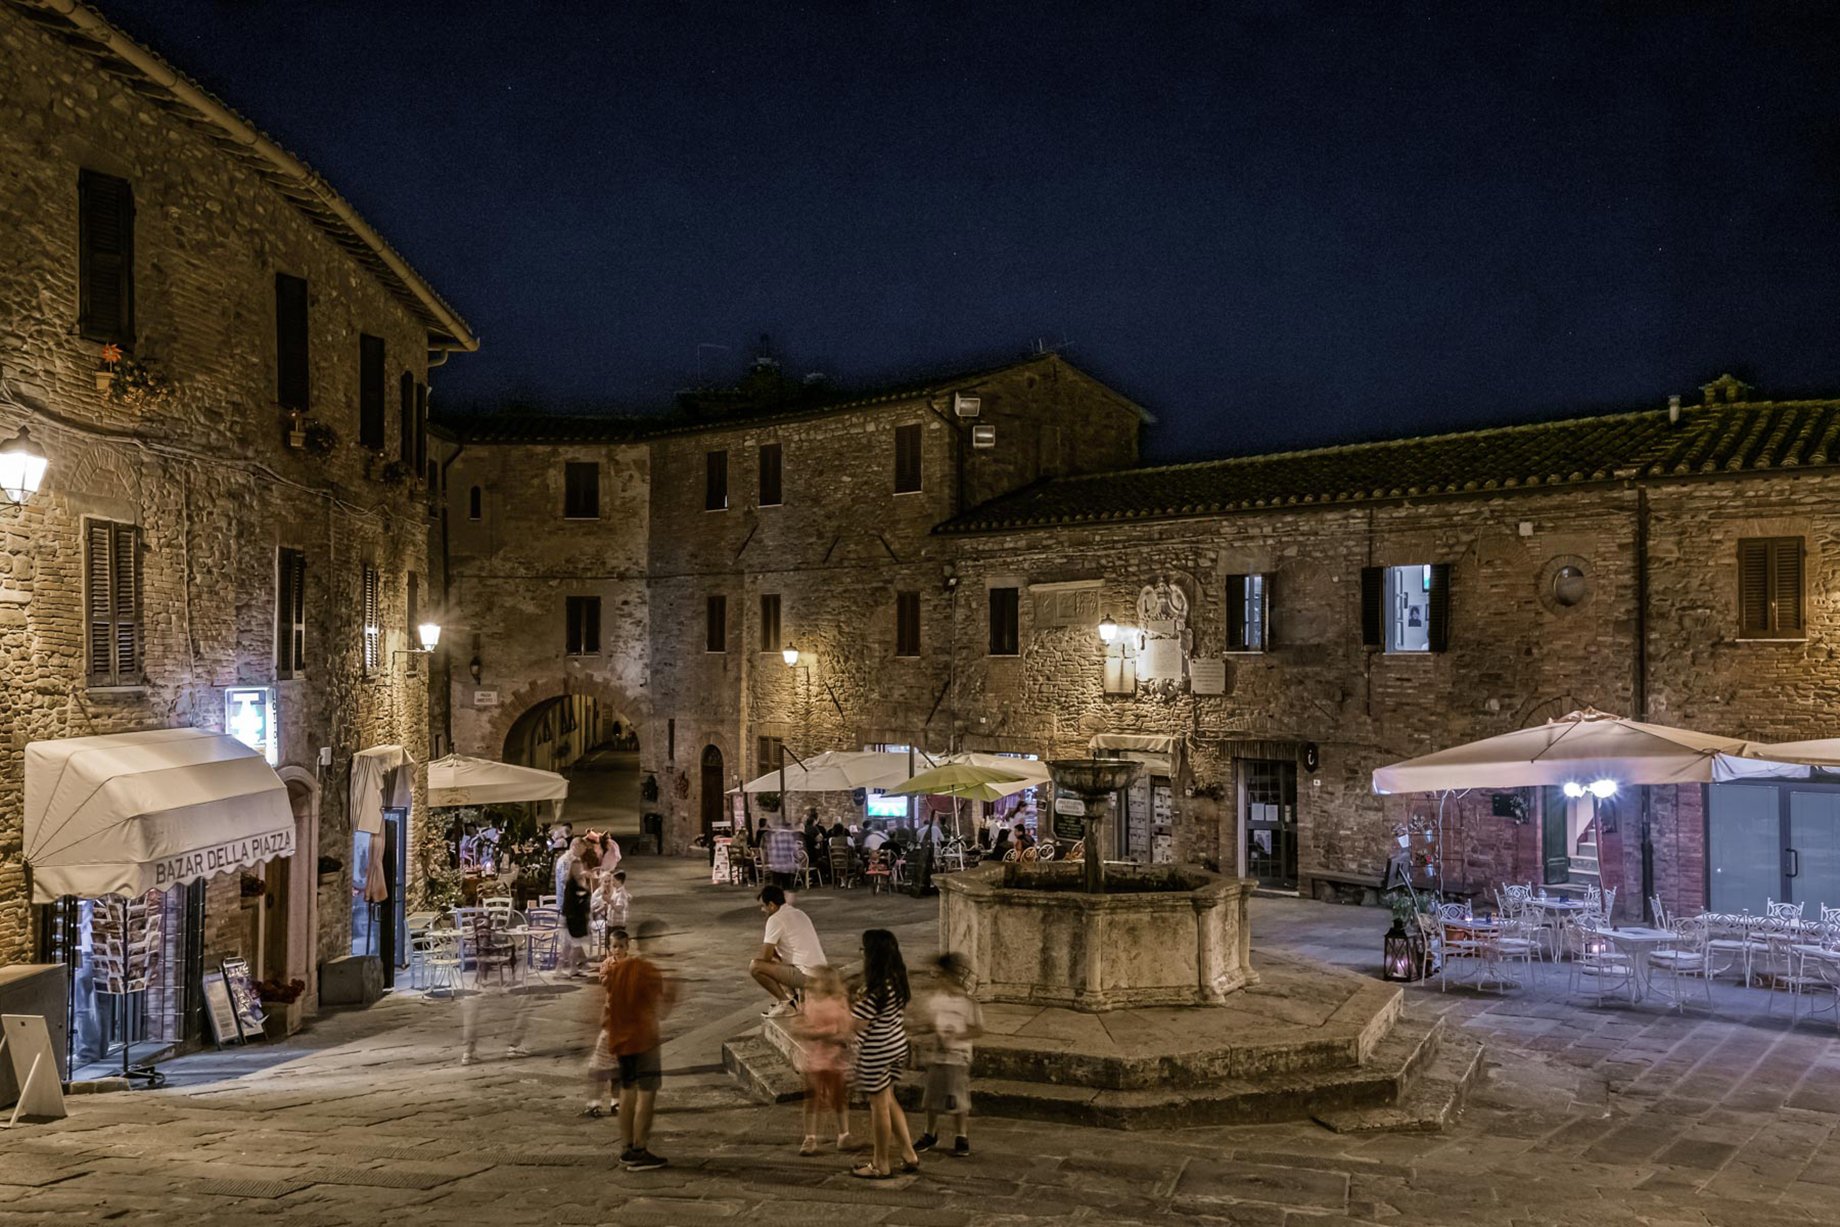 Photo of Panicale, Italy shot by Barry Schwartz for The New York Times 